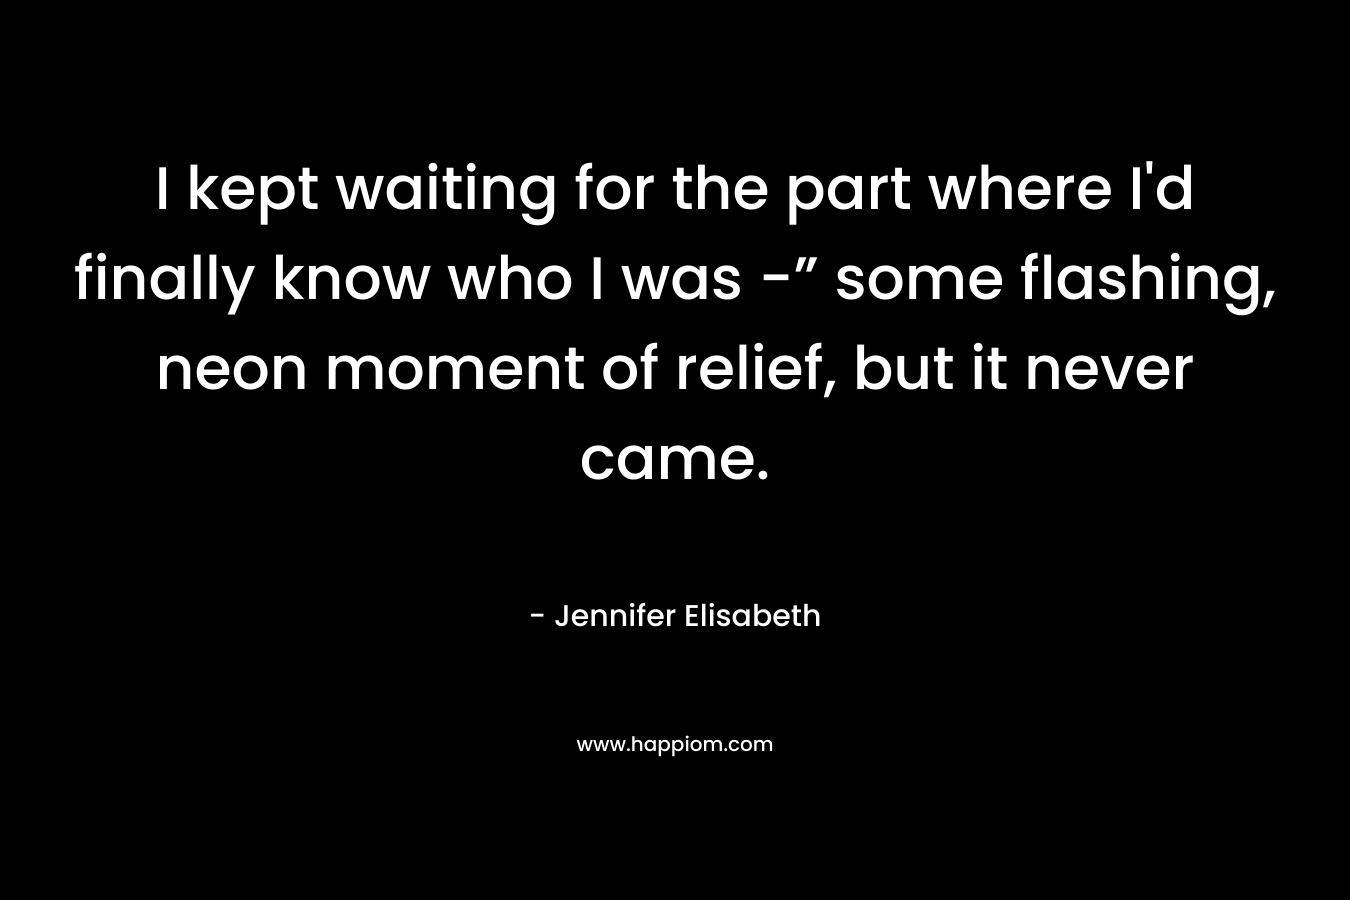 I kept waiting for the part where I’d finally know who I was -” some flashing, neon moment of relief, but it never came. – Jennifer Elisabeth